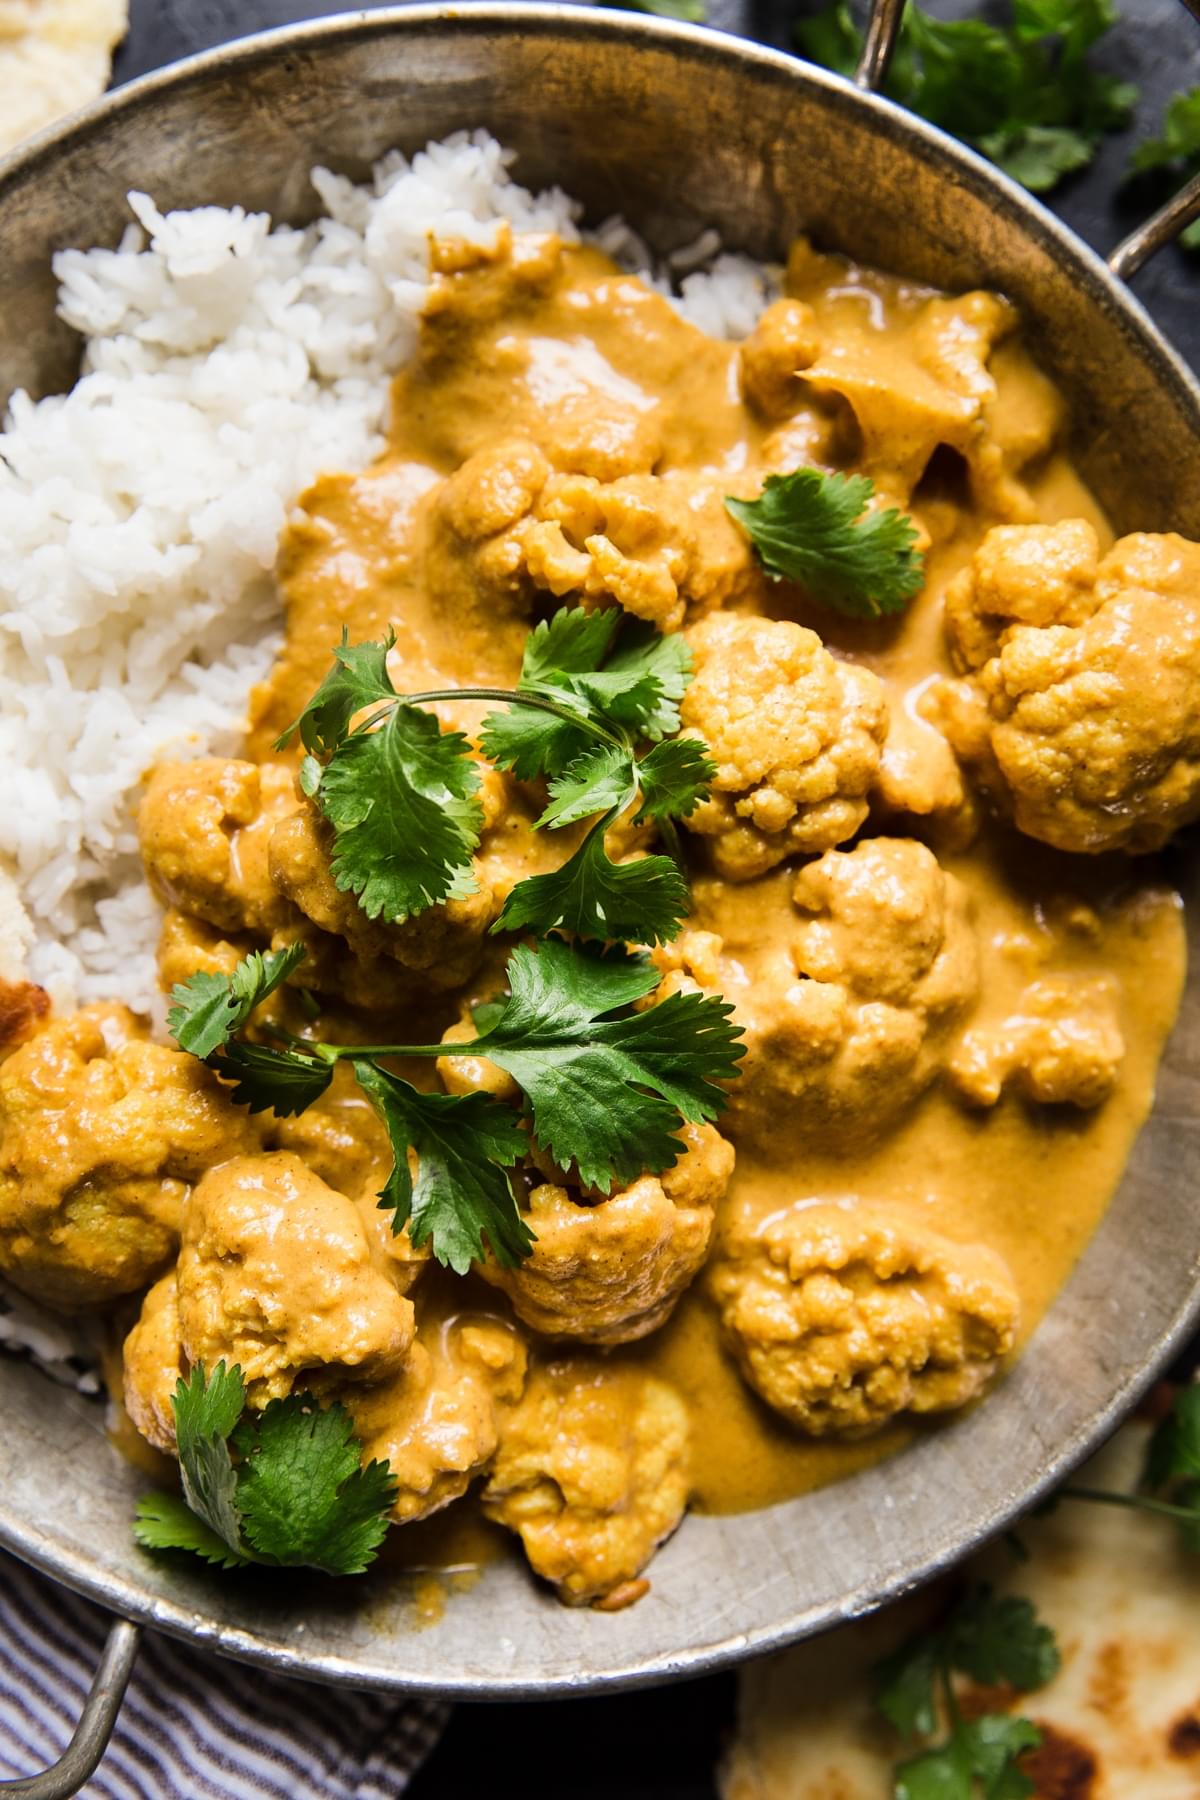 Low Carb Indian style curried cauliflower served with white rice